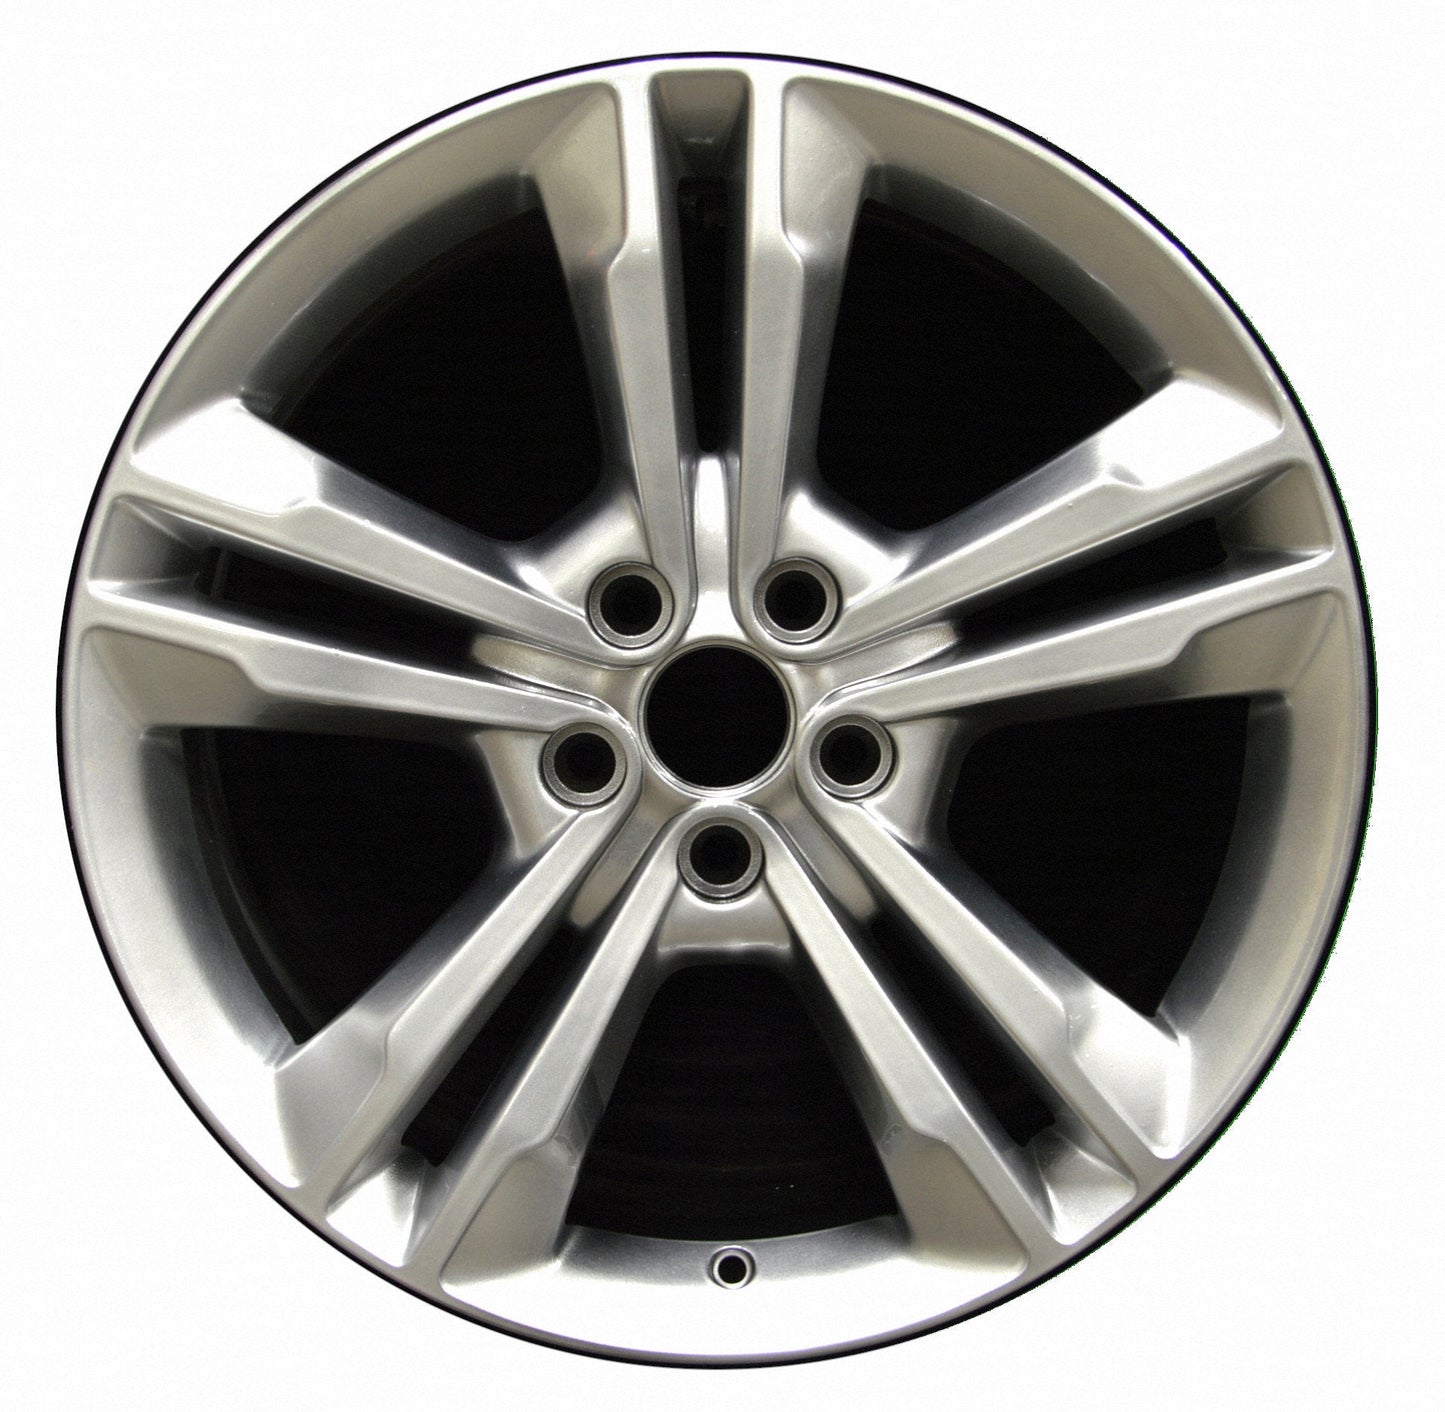 Dodge Charger  2011, 2012, 2013, 2014 Factory OEM Car Wheel Size 19x7.5 Alloy WAO.2410.LS100V2.FF